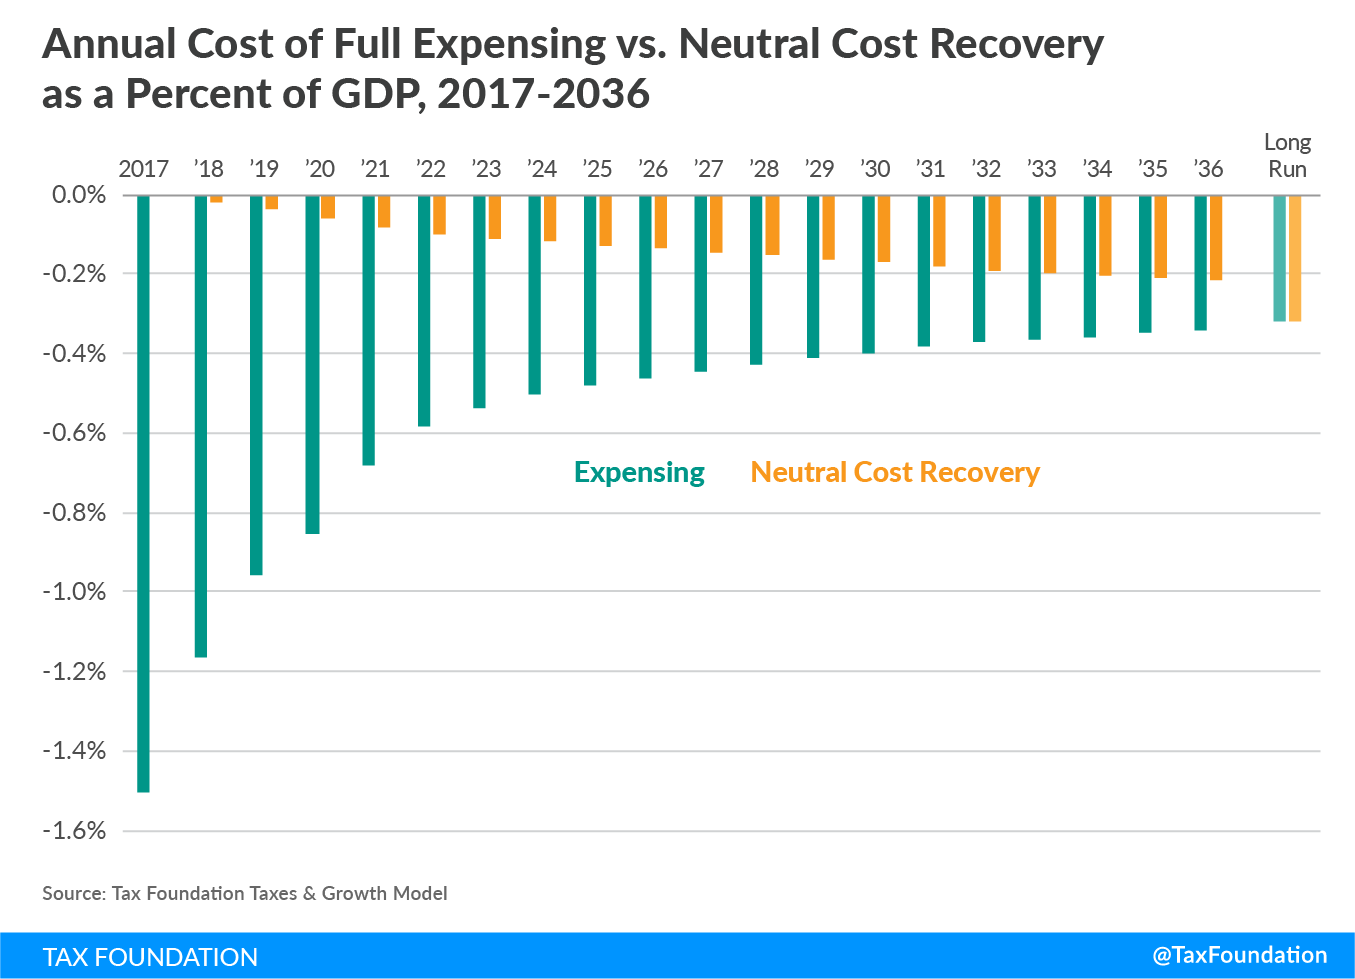 Annual Cost of Full Expensing vs. Neutral Cost Recovery as a Percent of GDP, 2017-2036